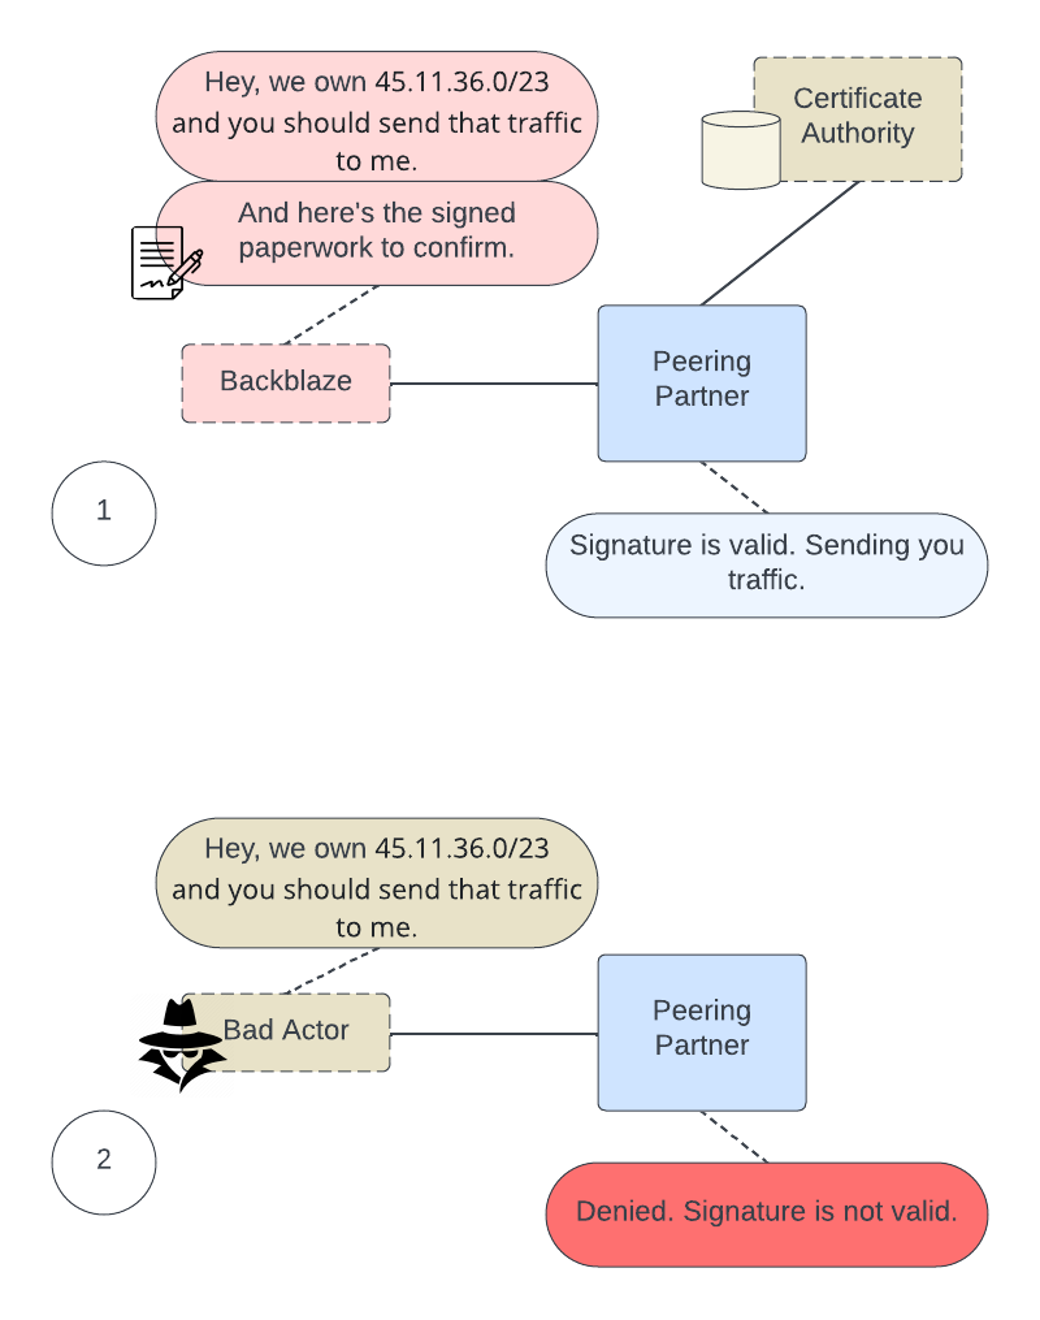 A diagram that imagines networking requests for ownership with RPKI standards properly applied. Bad actors would attempt to claim traffic towards an owned or valid IP address, but be prevented because they don't have the correct credentials. 